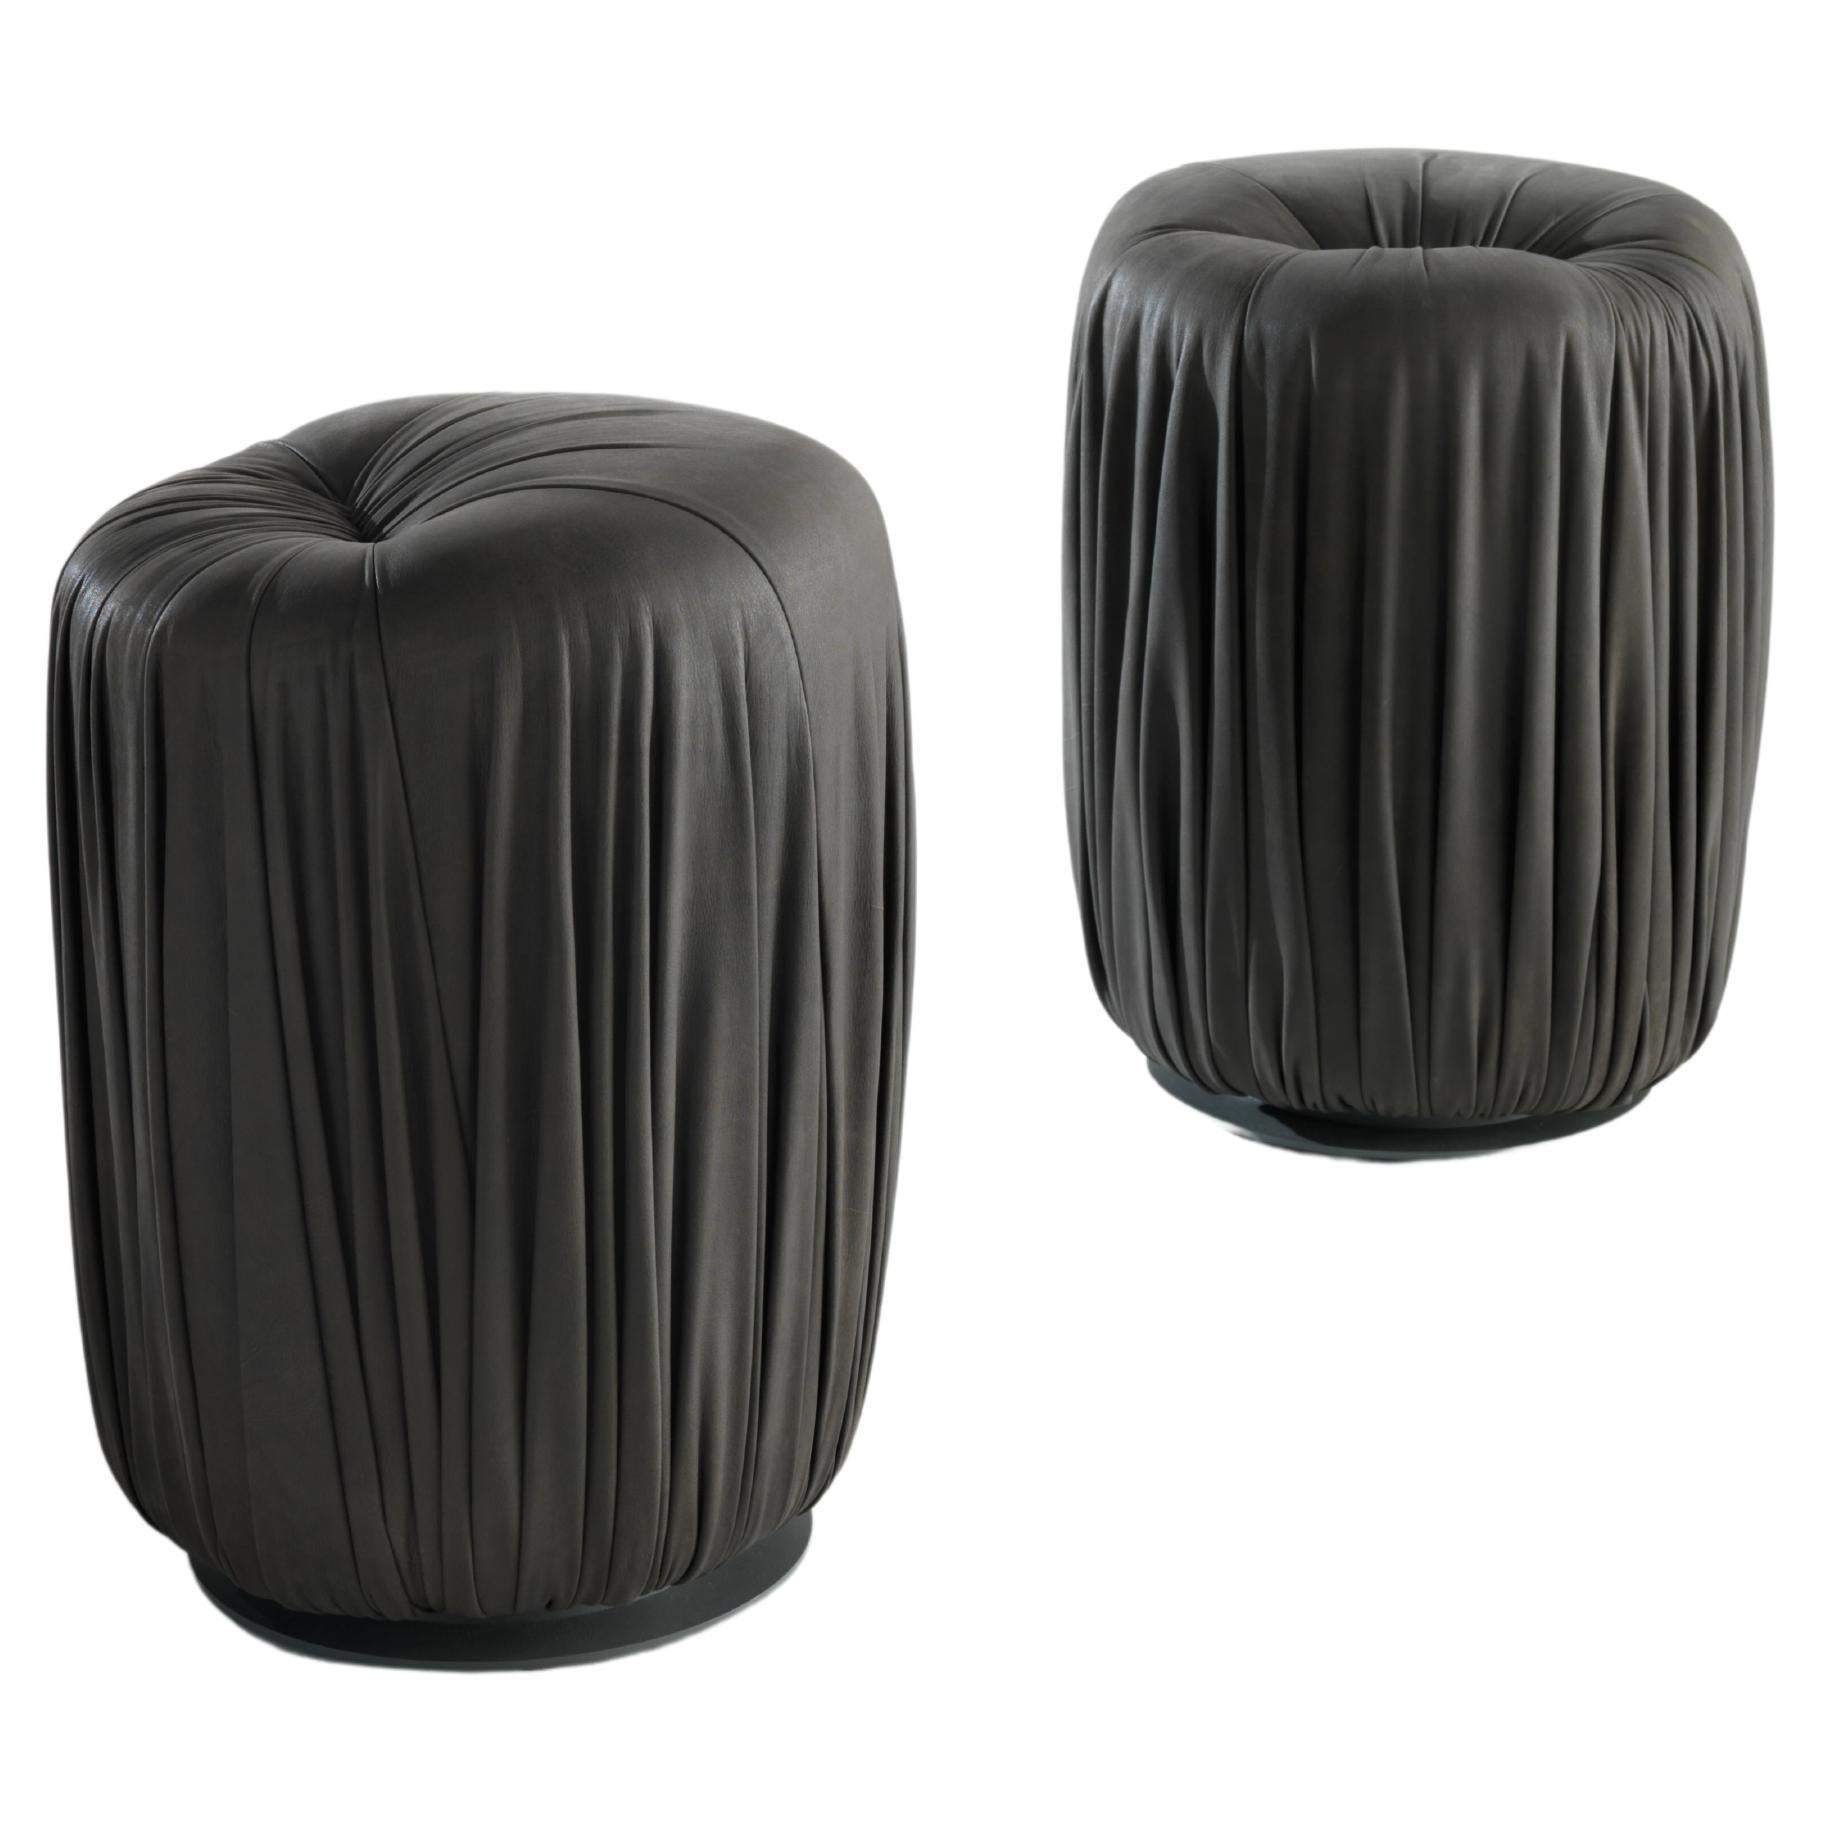 Laurameroni "Drapè" Custom Pouf in Hand-Pleated Leather or Velvet For Sale